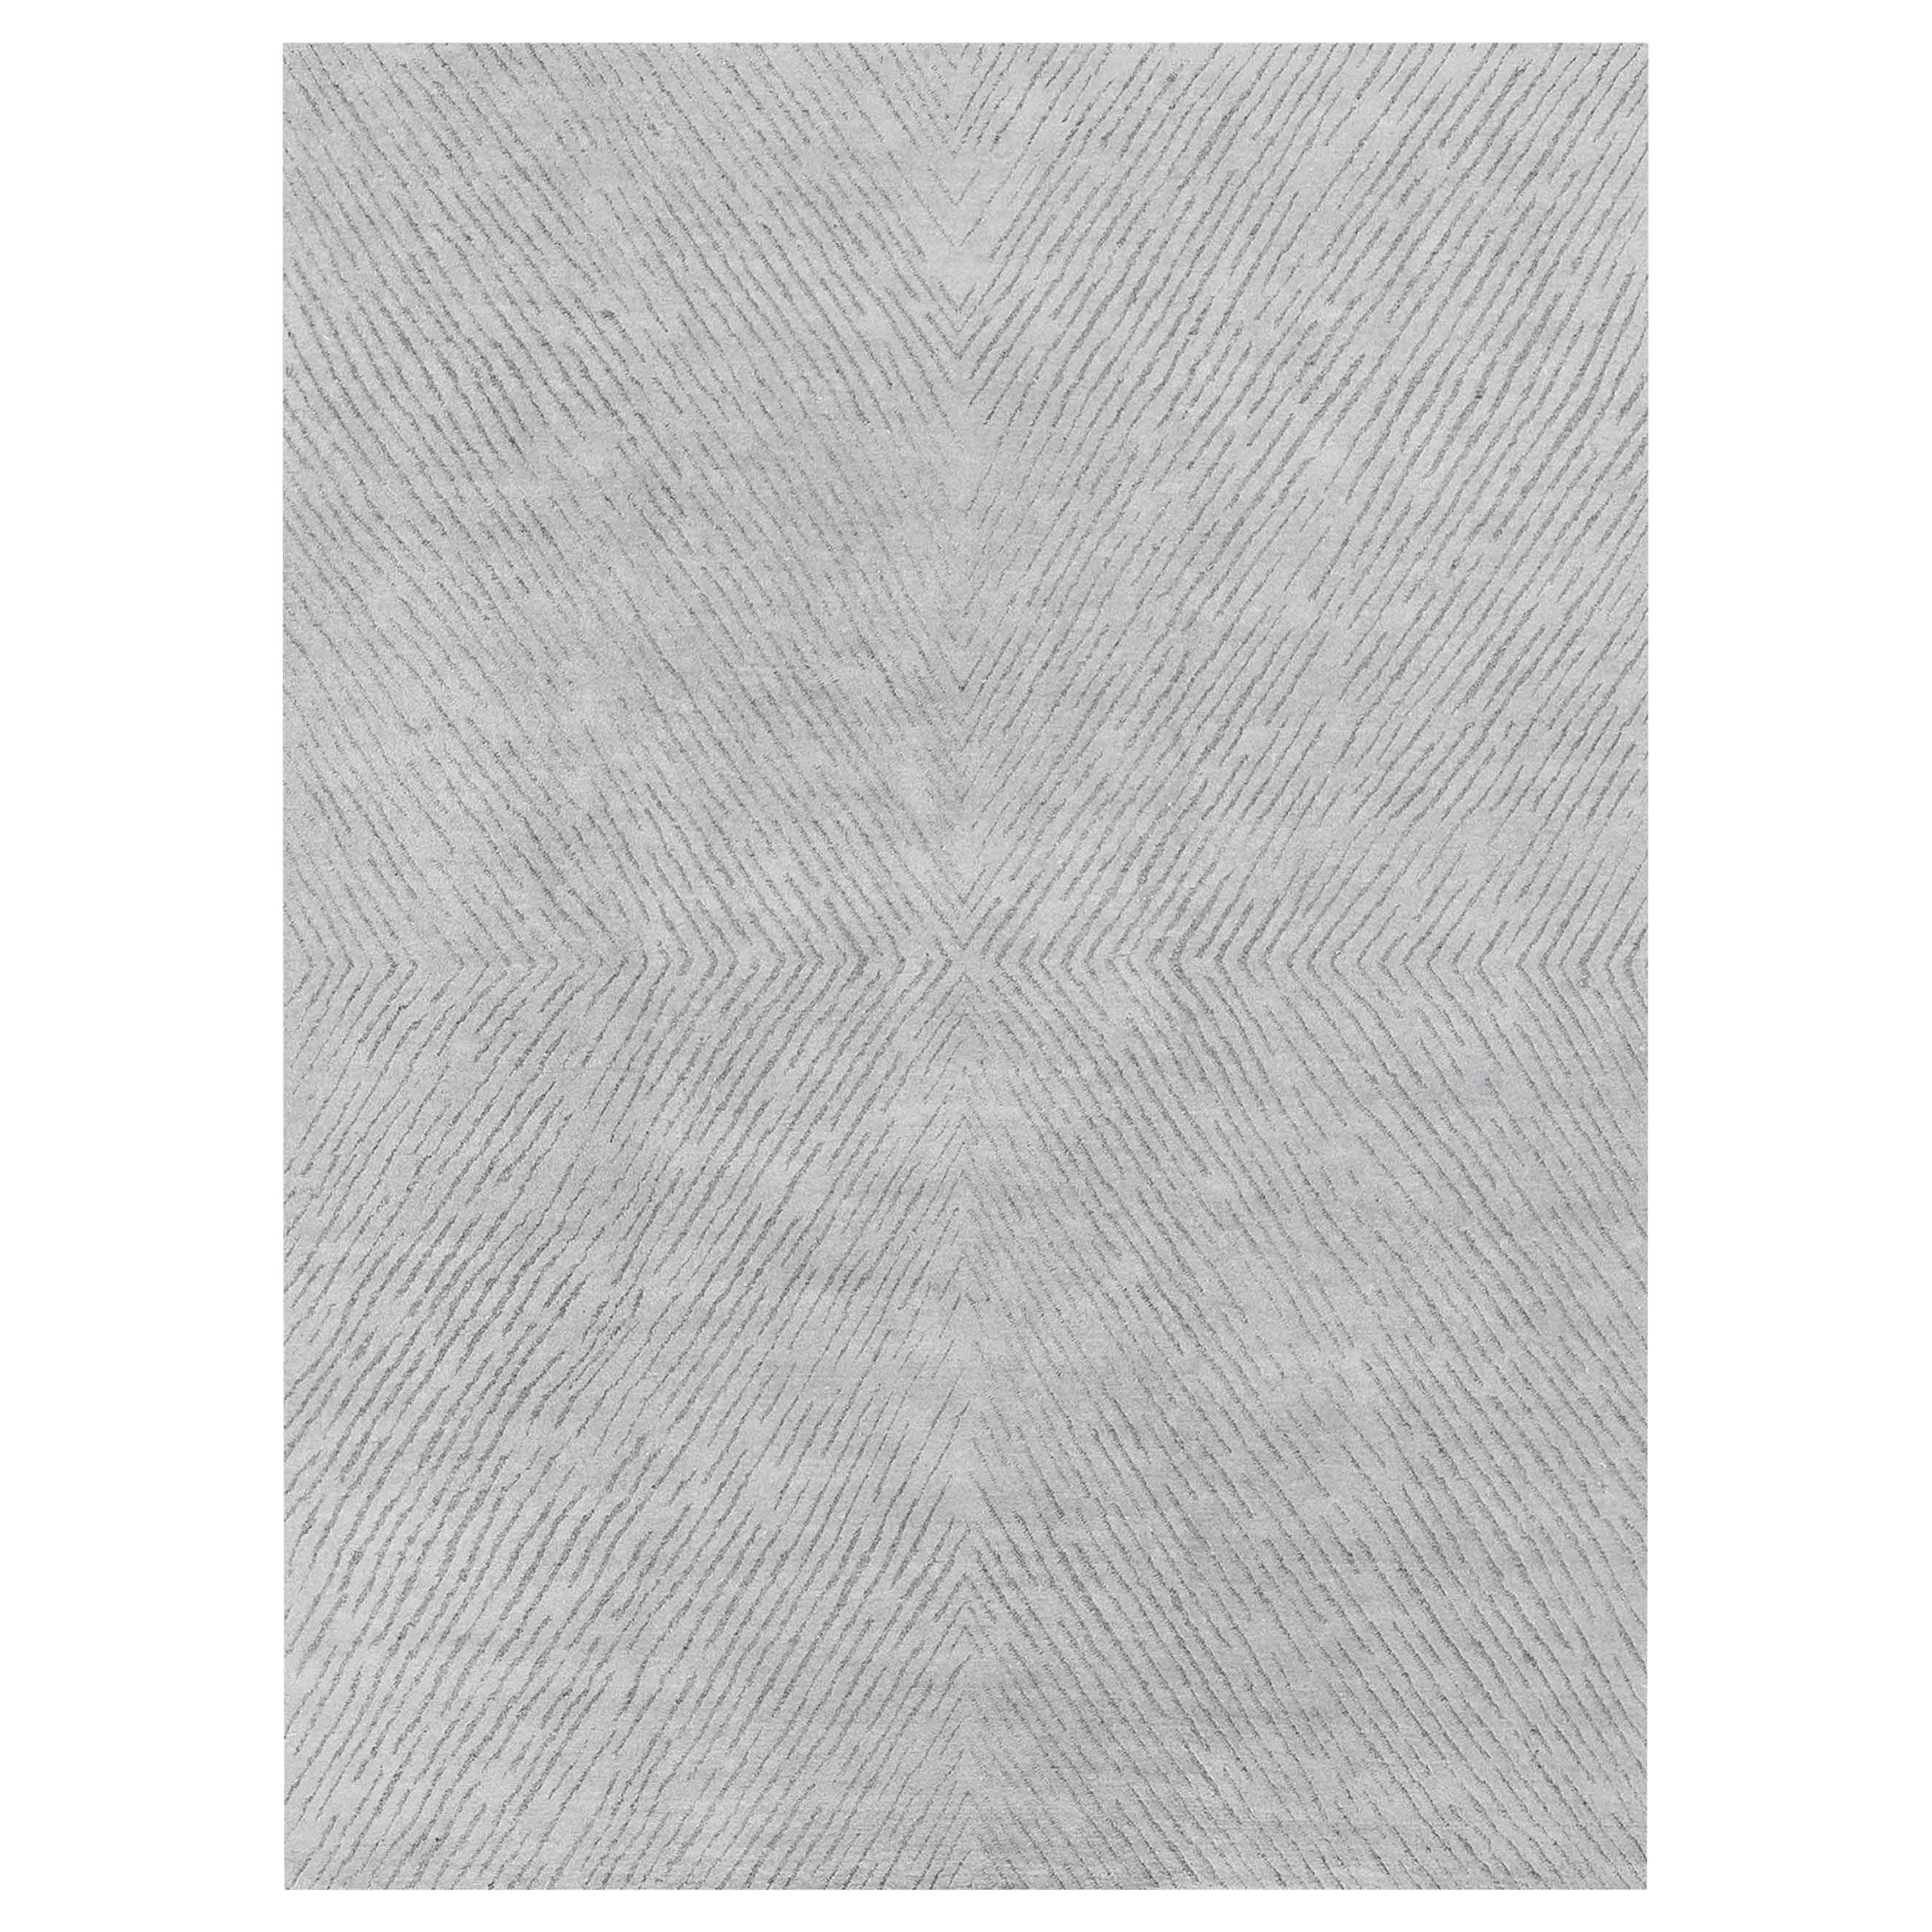 For Sale: Gray (Nickel/Carbon) Ben Soleimani Performance Setta Rug– Handknotted Soft Pile Nickel/Carbon 6'x9'